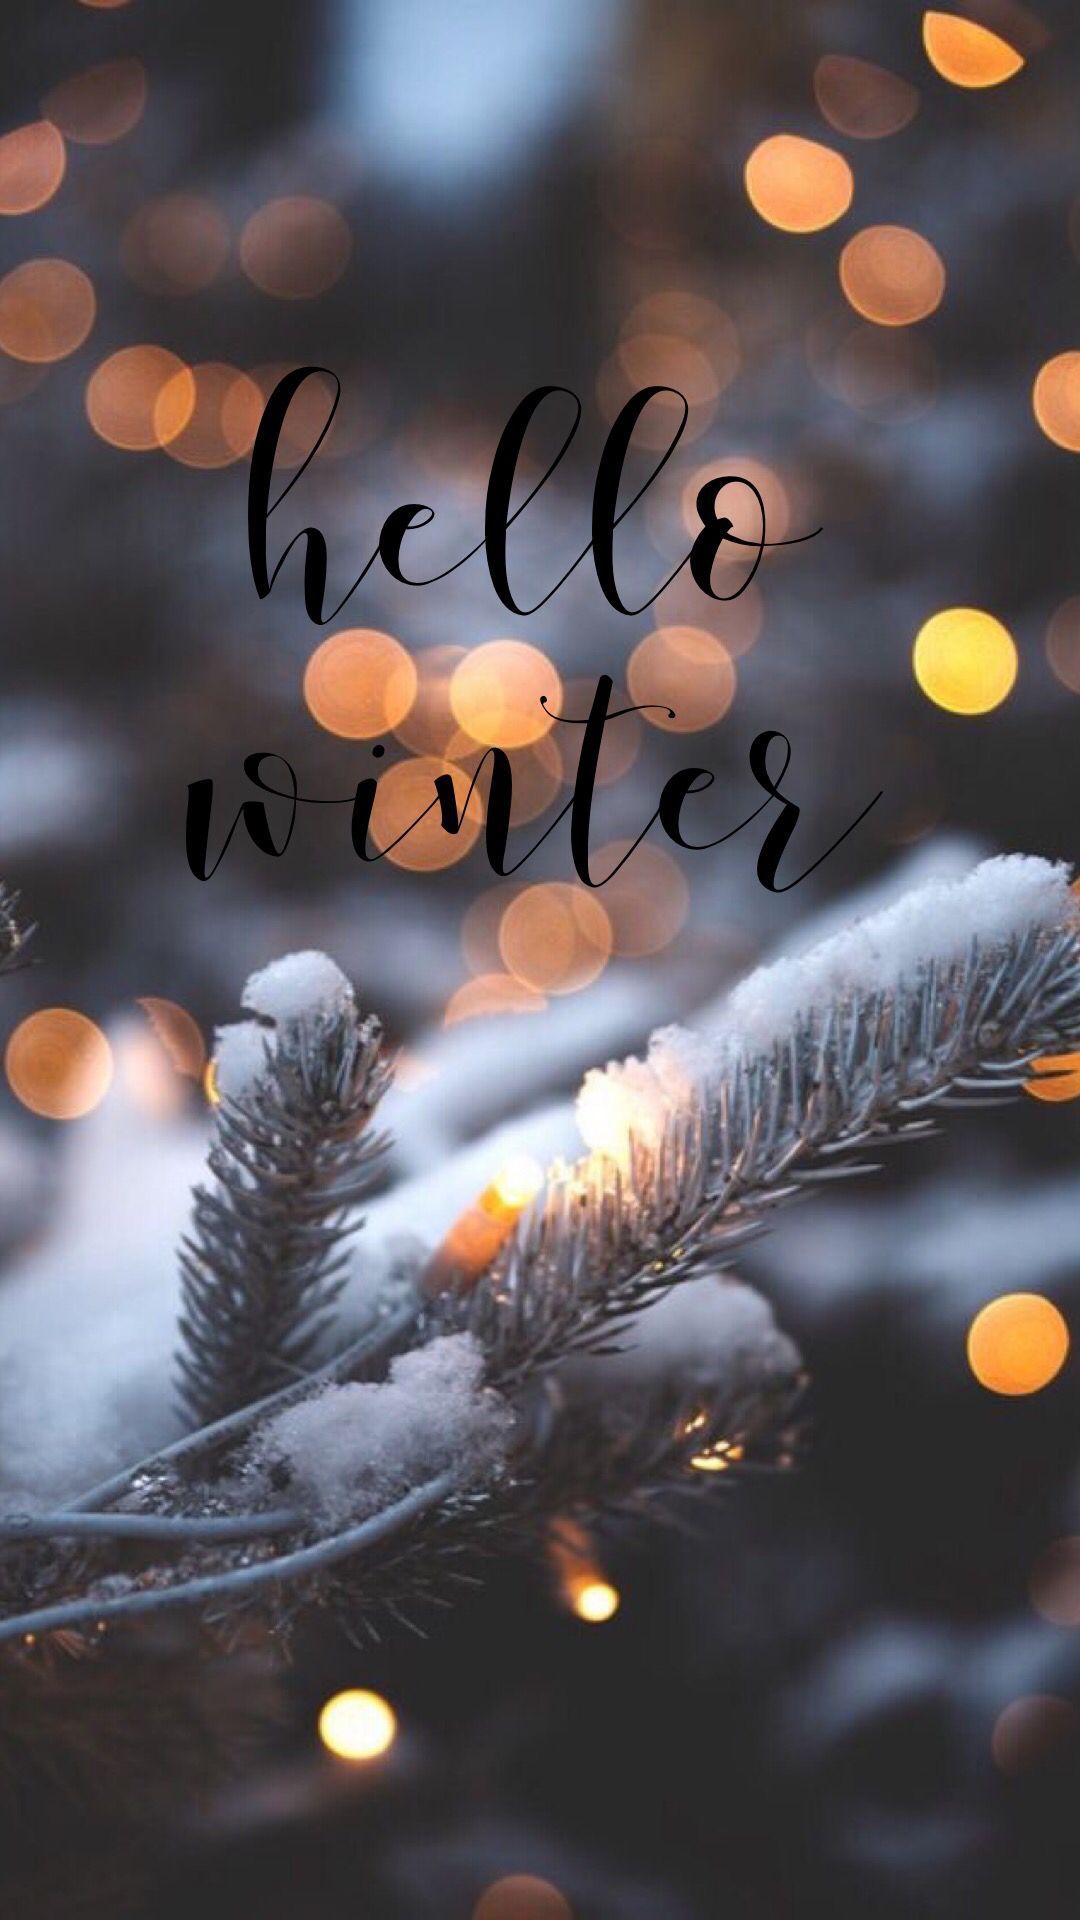 A photo of hello winter with snowflakes and lights - Winter, December